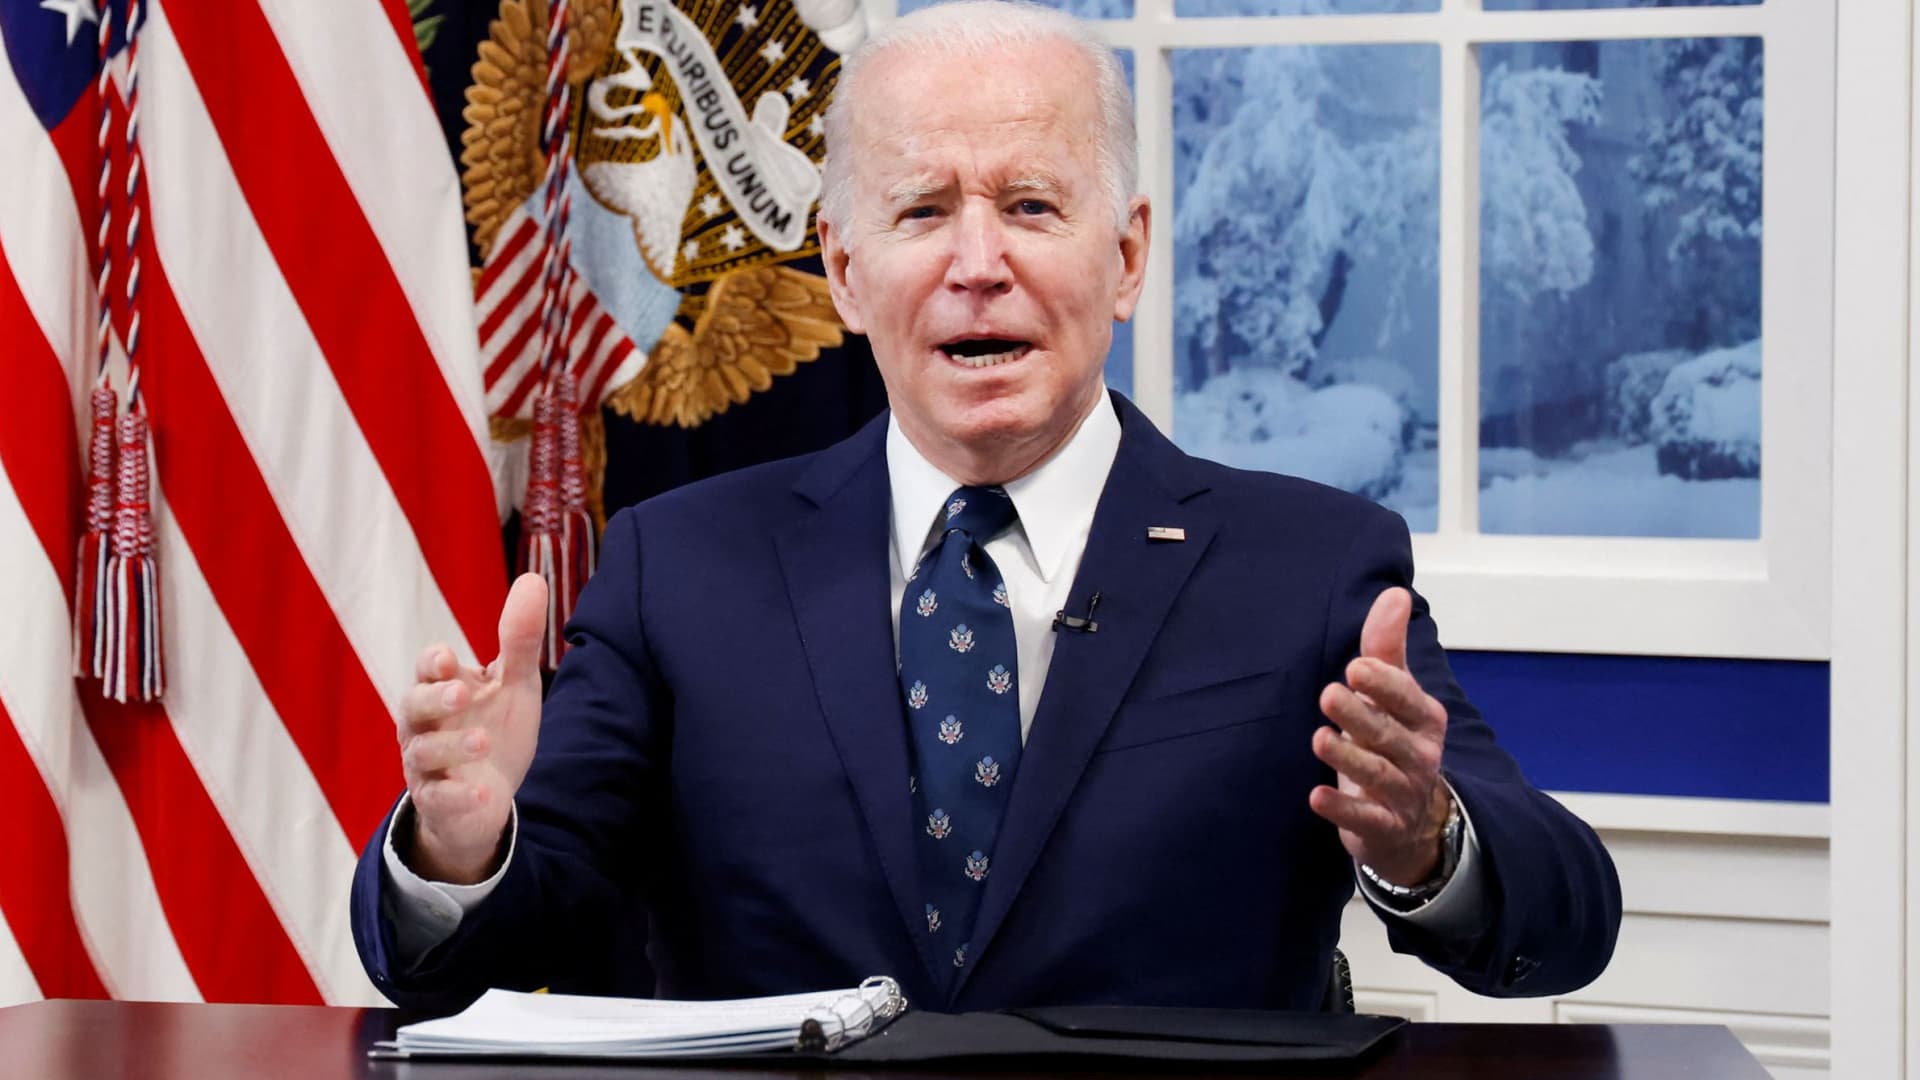 U.S. President Joe Biden speaks during a video conference with farmers, ranchers and meat processors to discuss meat and poultry supply chain issues, from an auditorium on the White House campus in Washington, January 3, 2022.